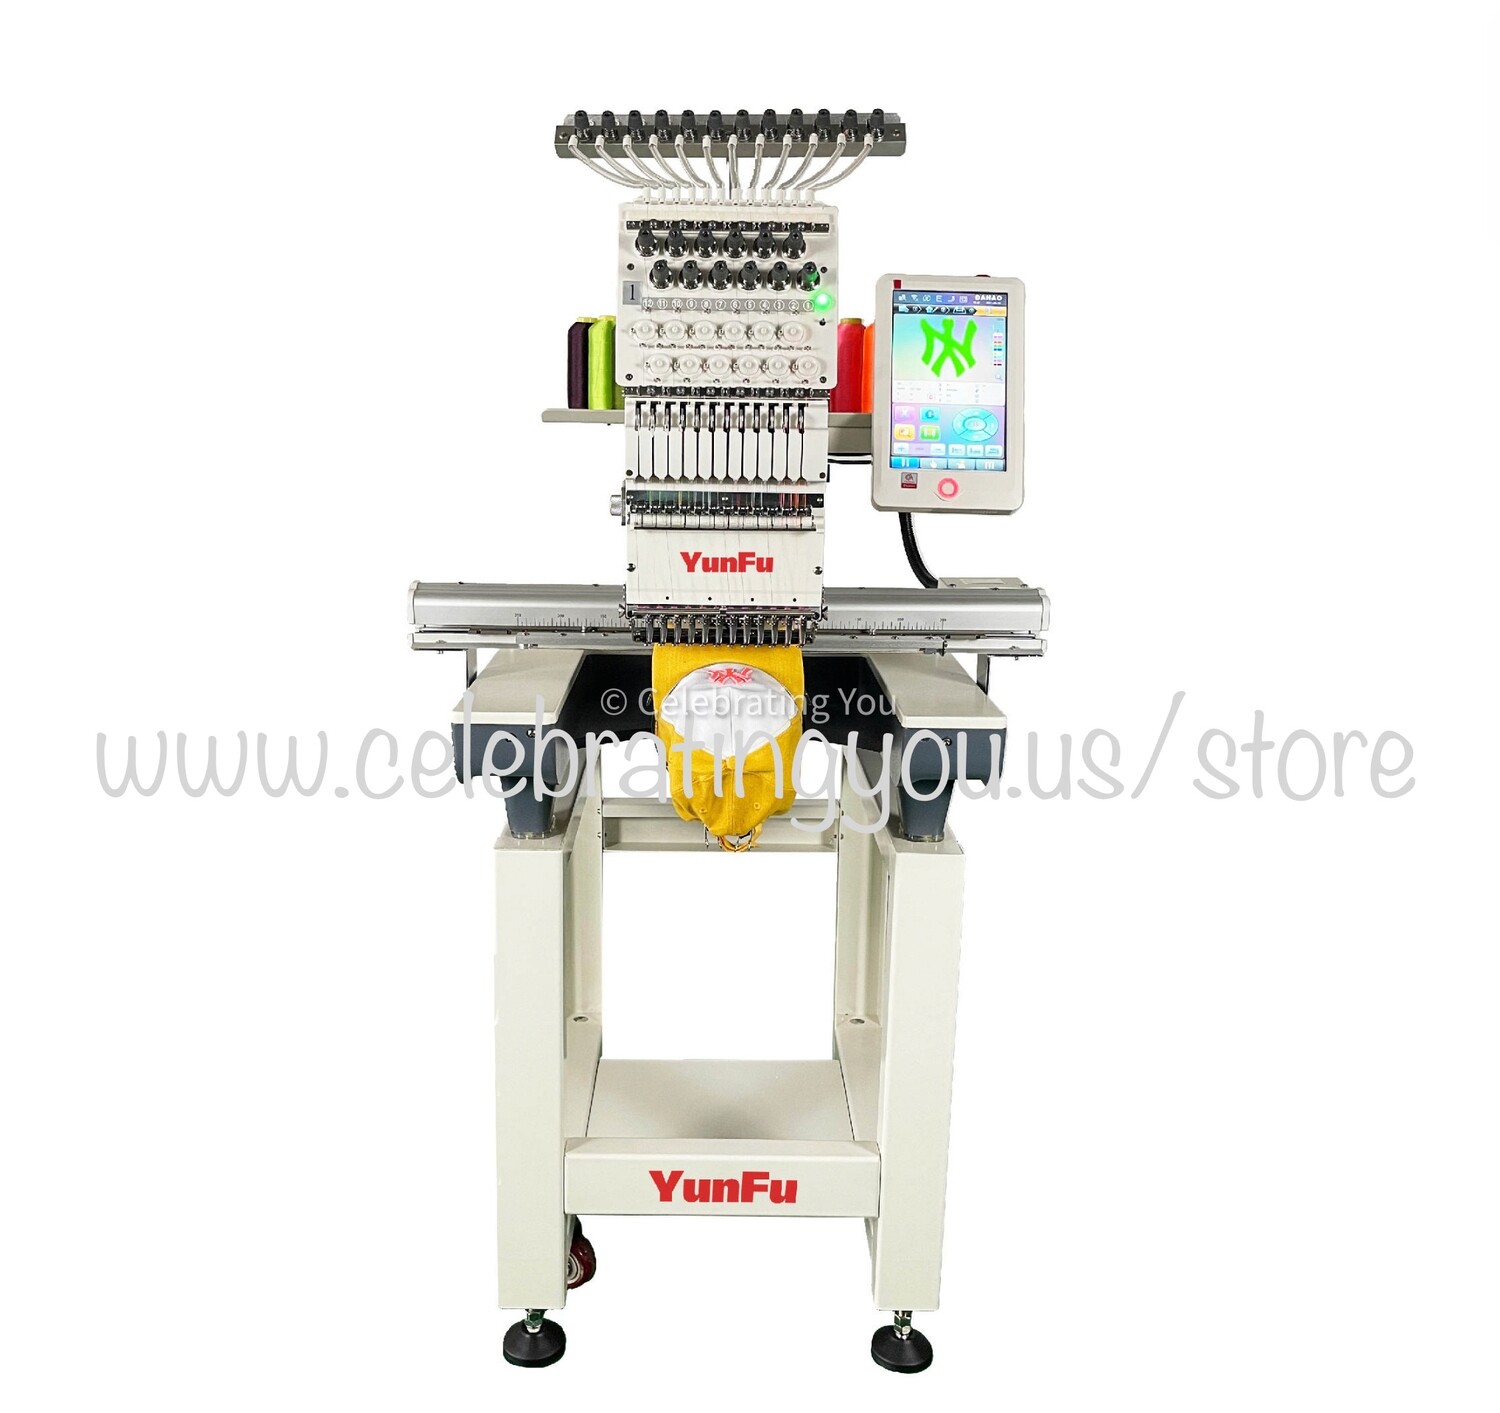 YungFu Customizable 12 or 15 Needle Single Head Compact Commercial Embroidery Machine up to 1200 RPM Speed with a 10" Color LCD Touch Screen with optional Cording, Color Loose Beads and Color Sequins